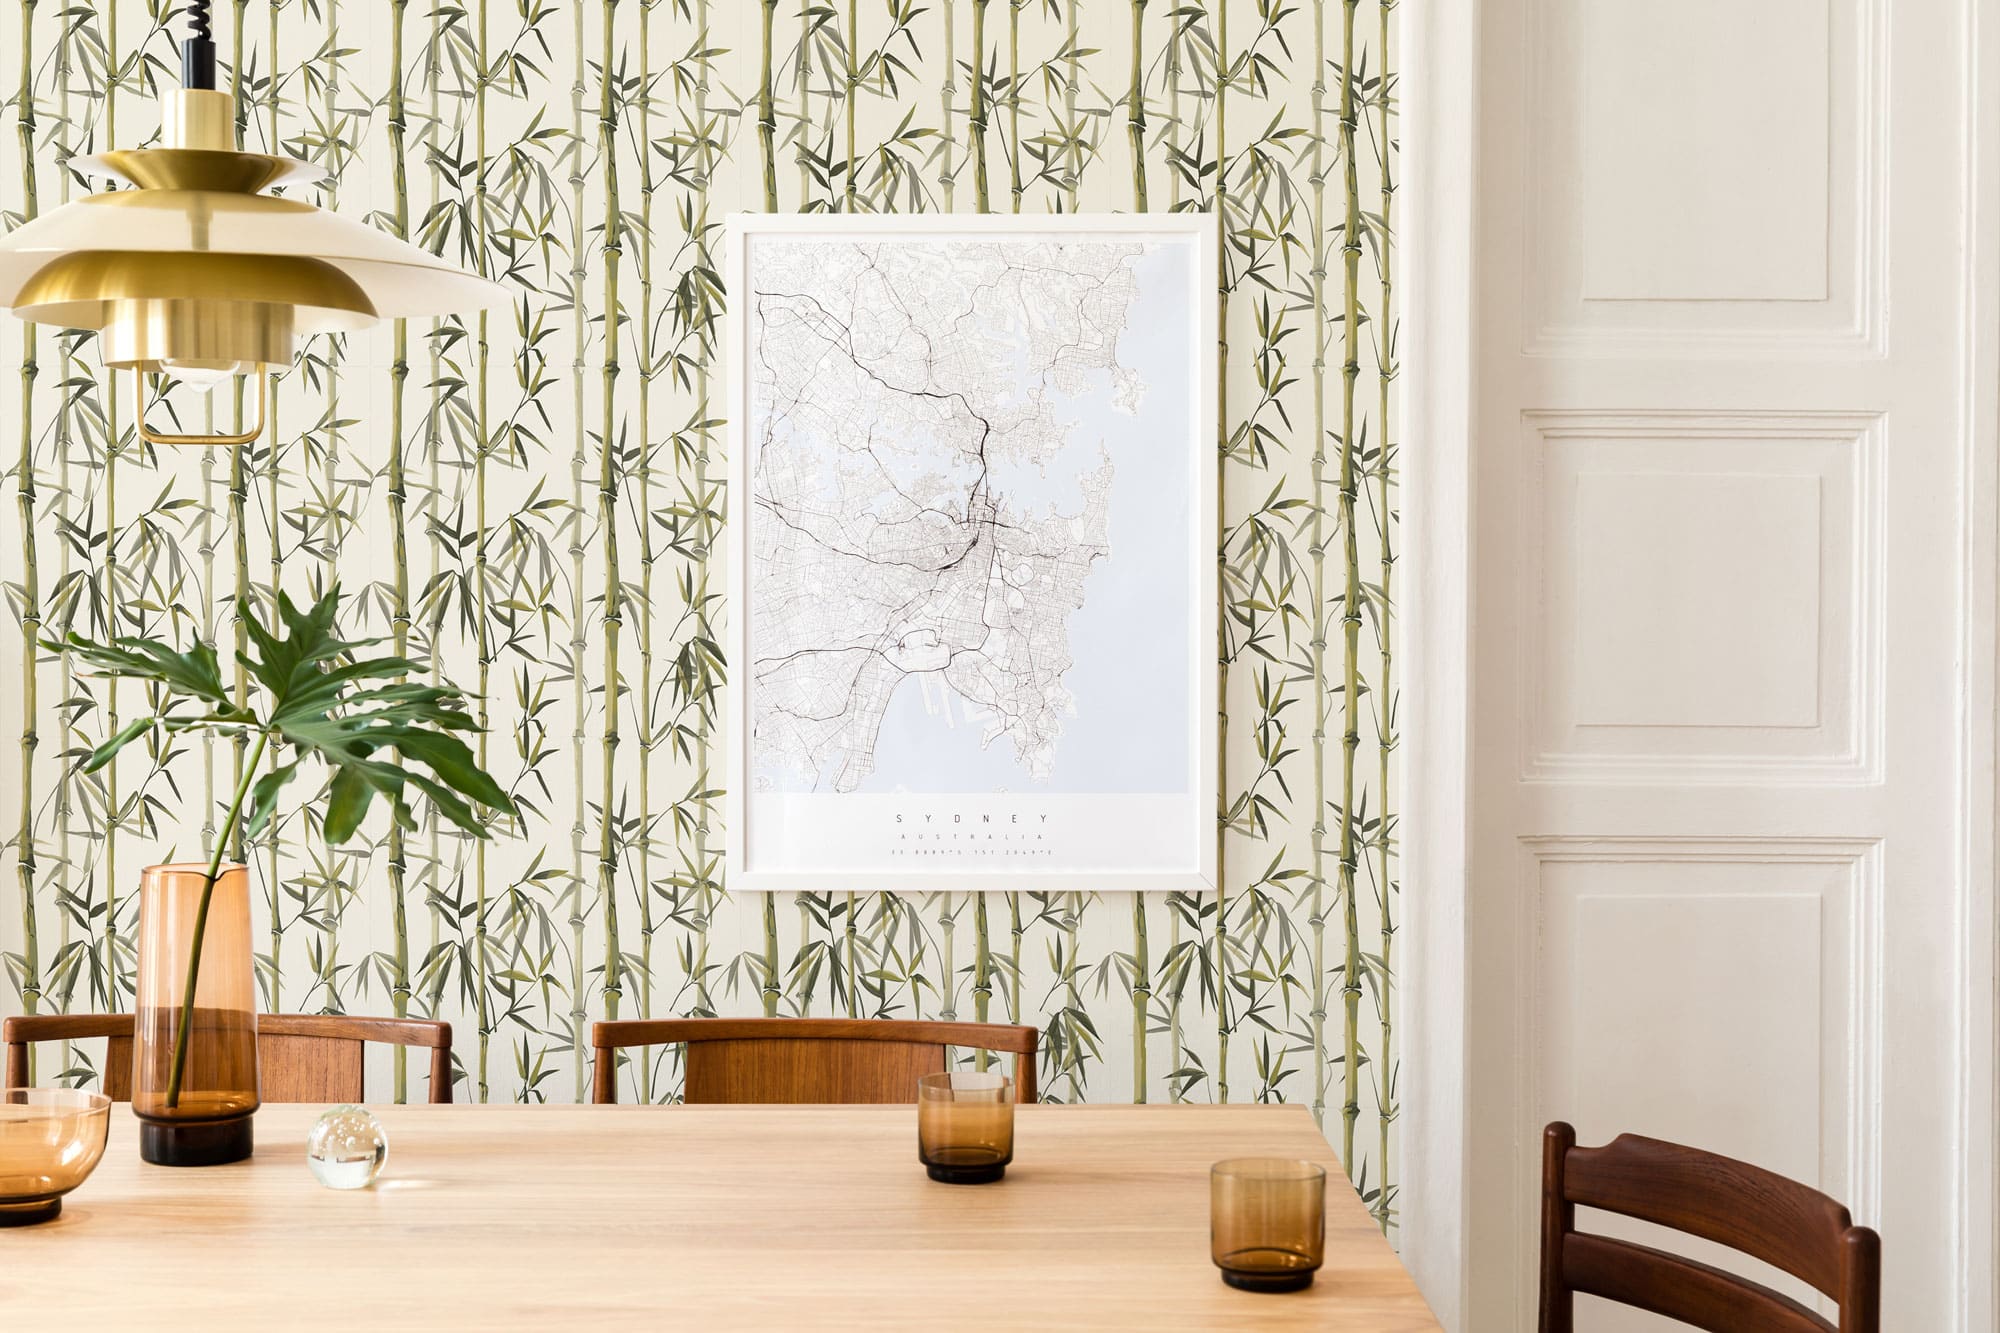 Buy Bamboo Shoot Plant Background NonPVC SelfAdhesive Peel  Stick Vinyl  Wallpaper Roll Online in India at Best Price  Modern WallPaper  Wall Arts   Home Decor  Furniture  Wooden Street Product